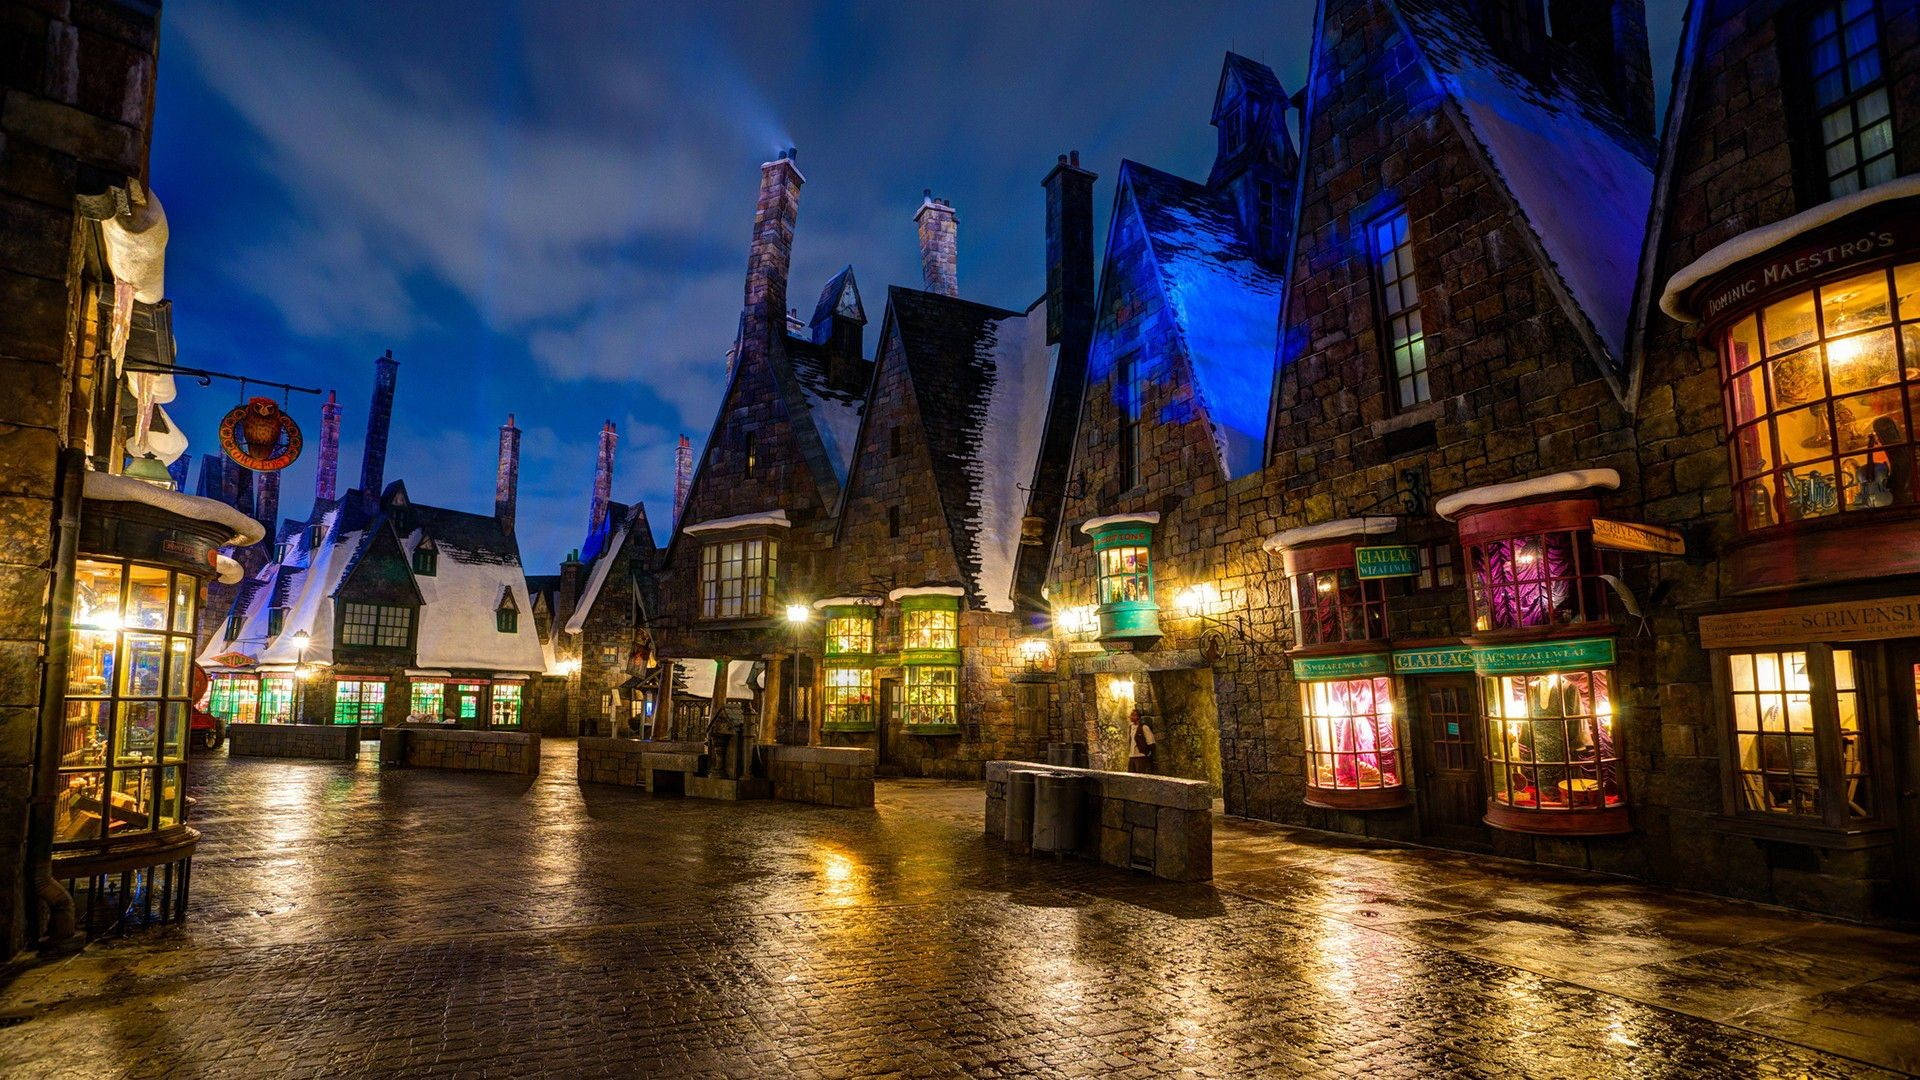 Universalstudios Hogsmeade Village Would Be Translated As 